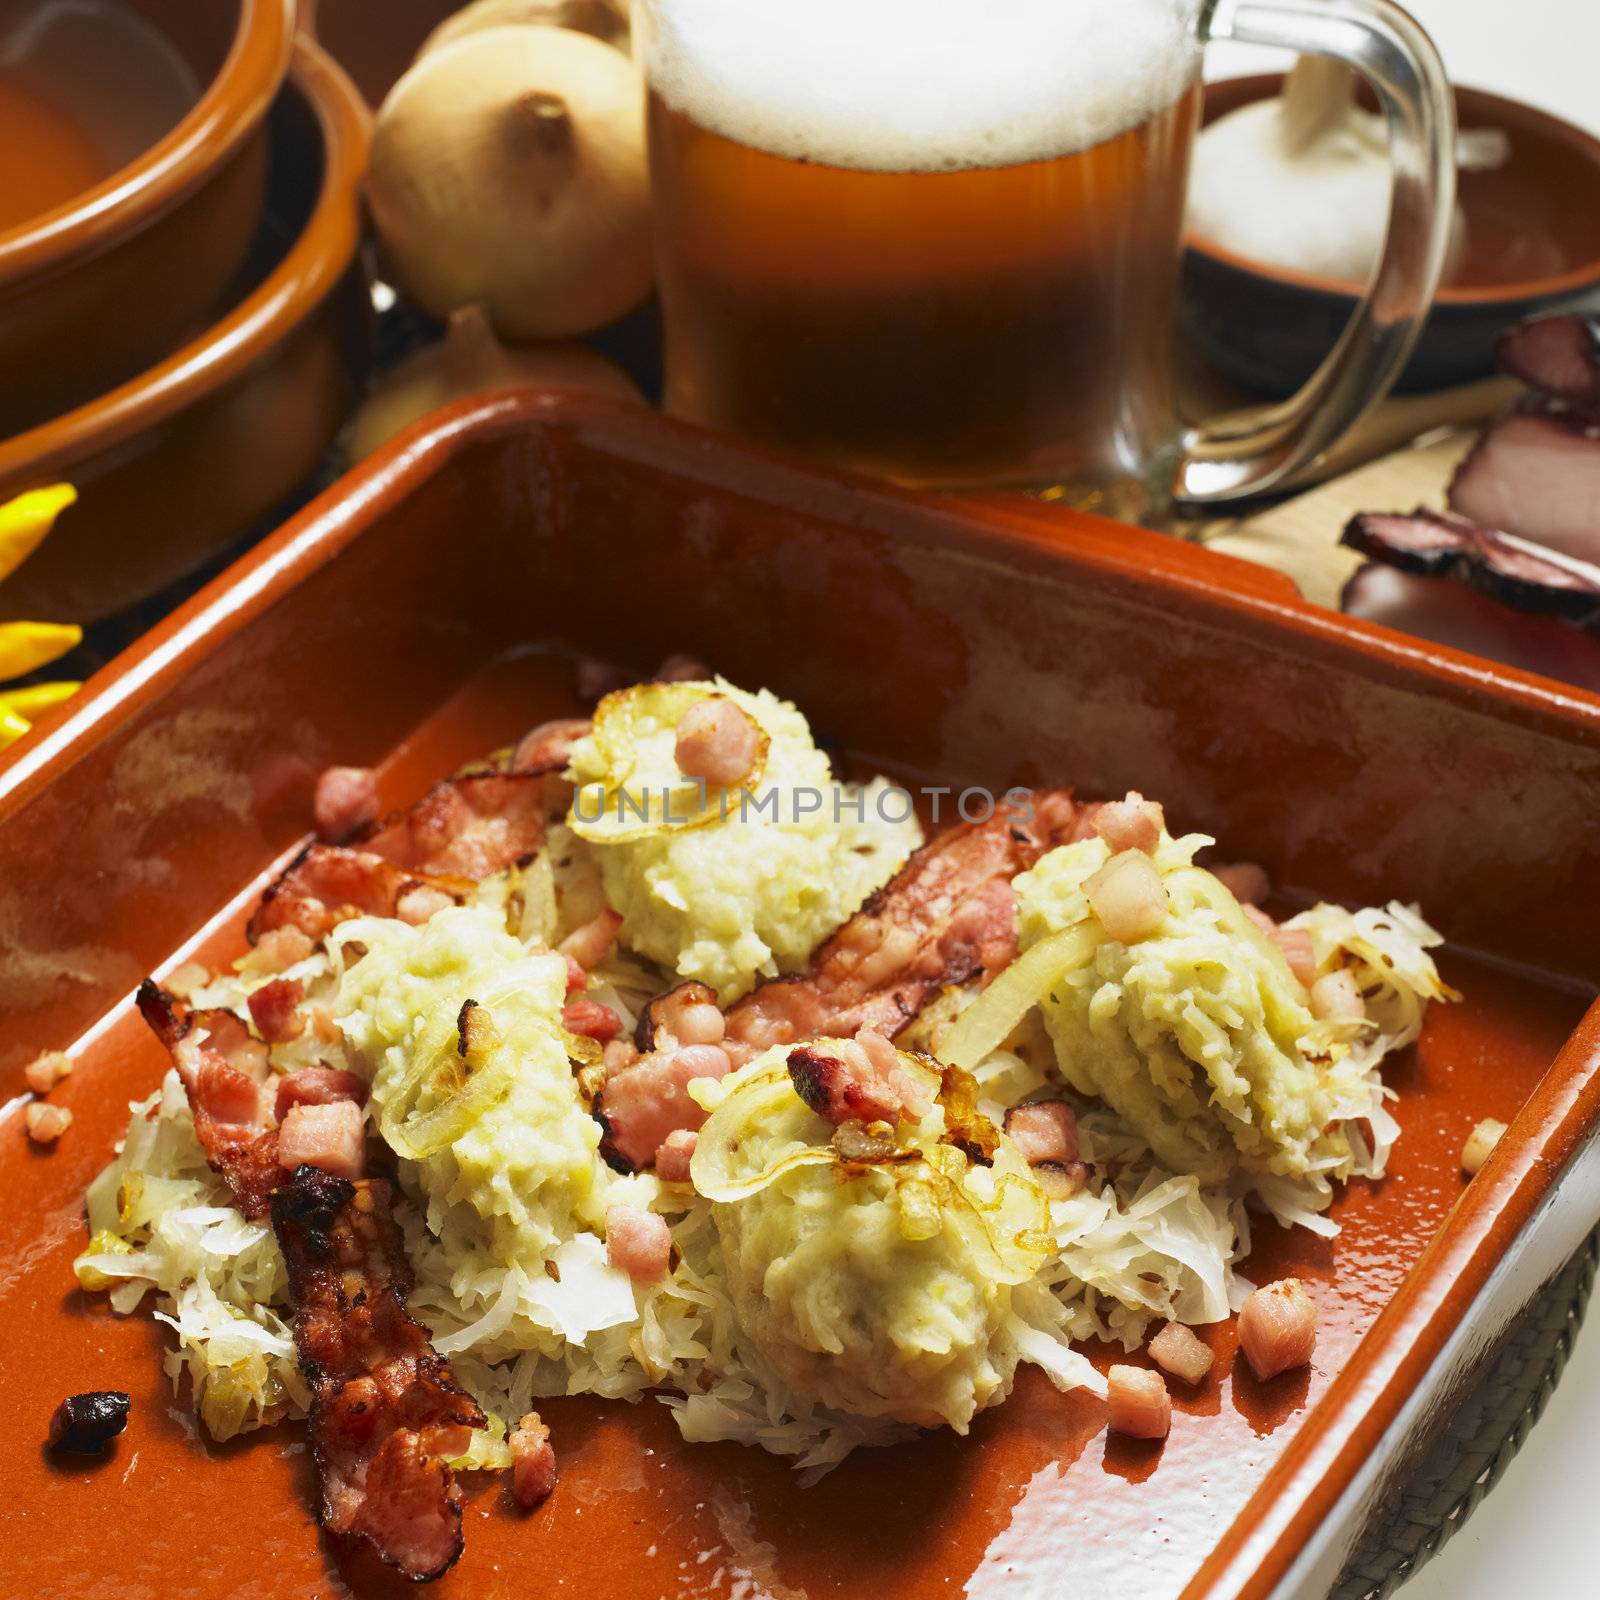 South Bohemian dumplings with cabbage by phbcz